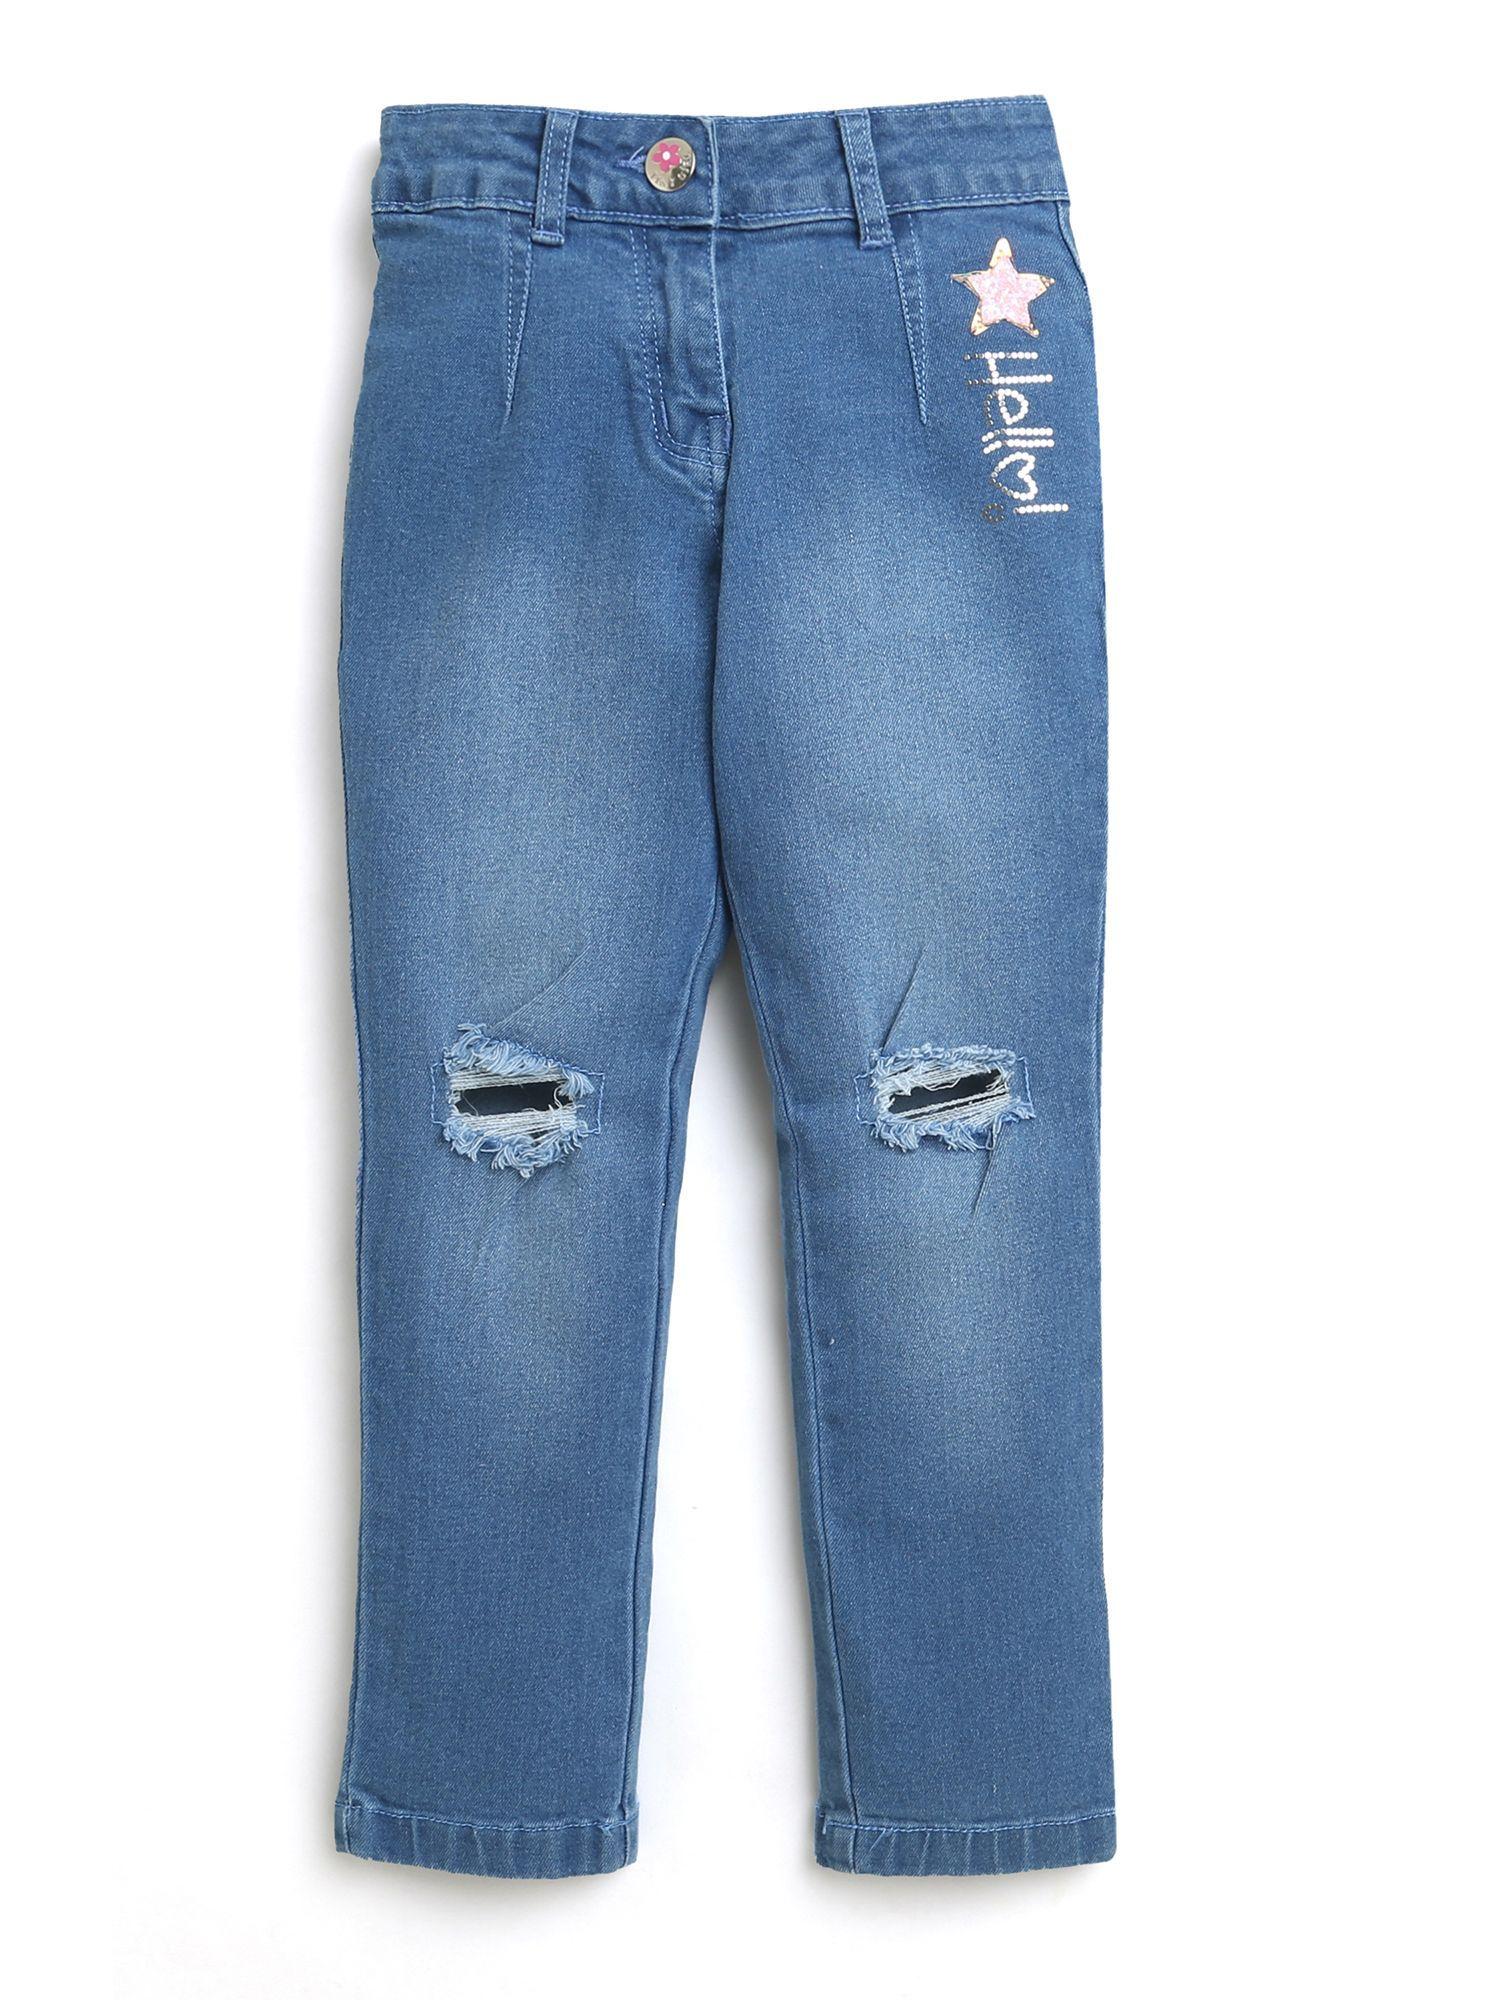 star embellished ripped knees distress detail jeans - blue